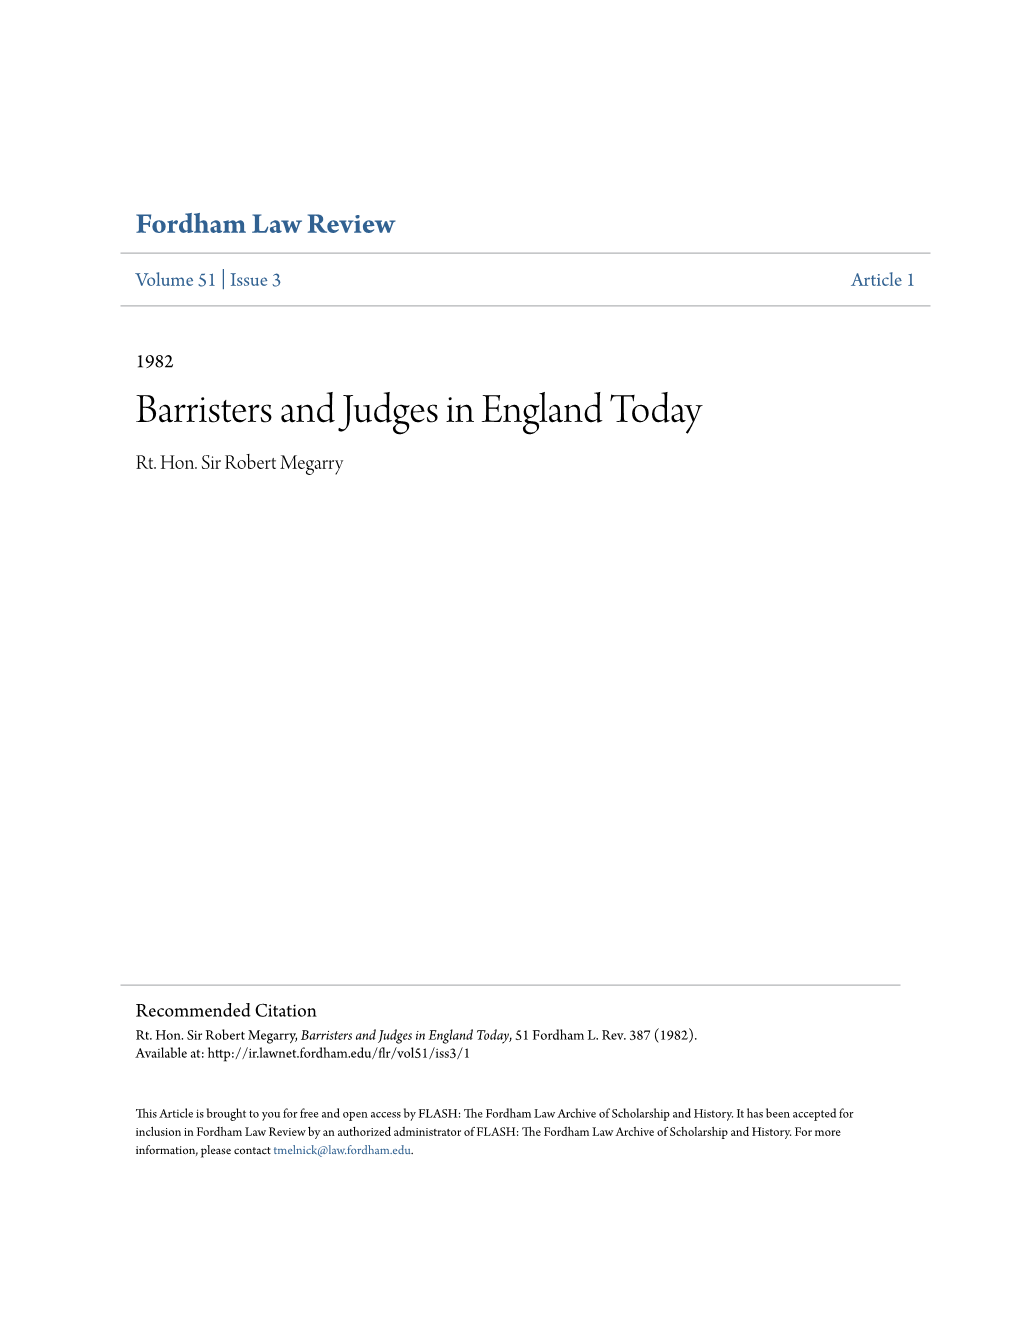 Barristers and Judges in England Today Rt